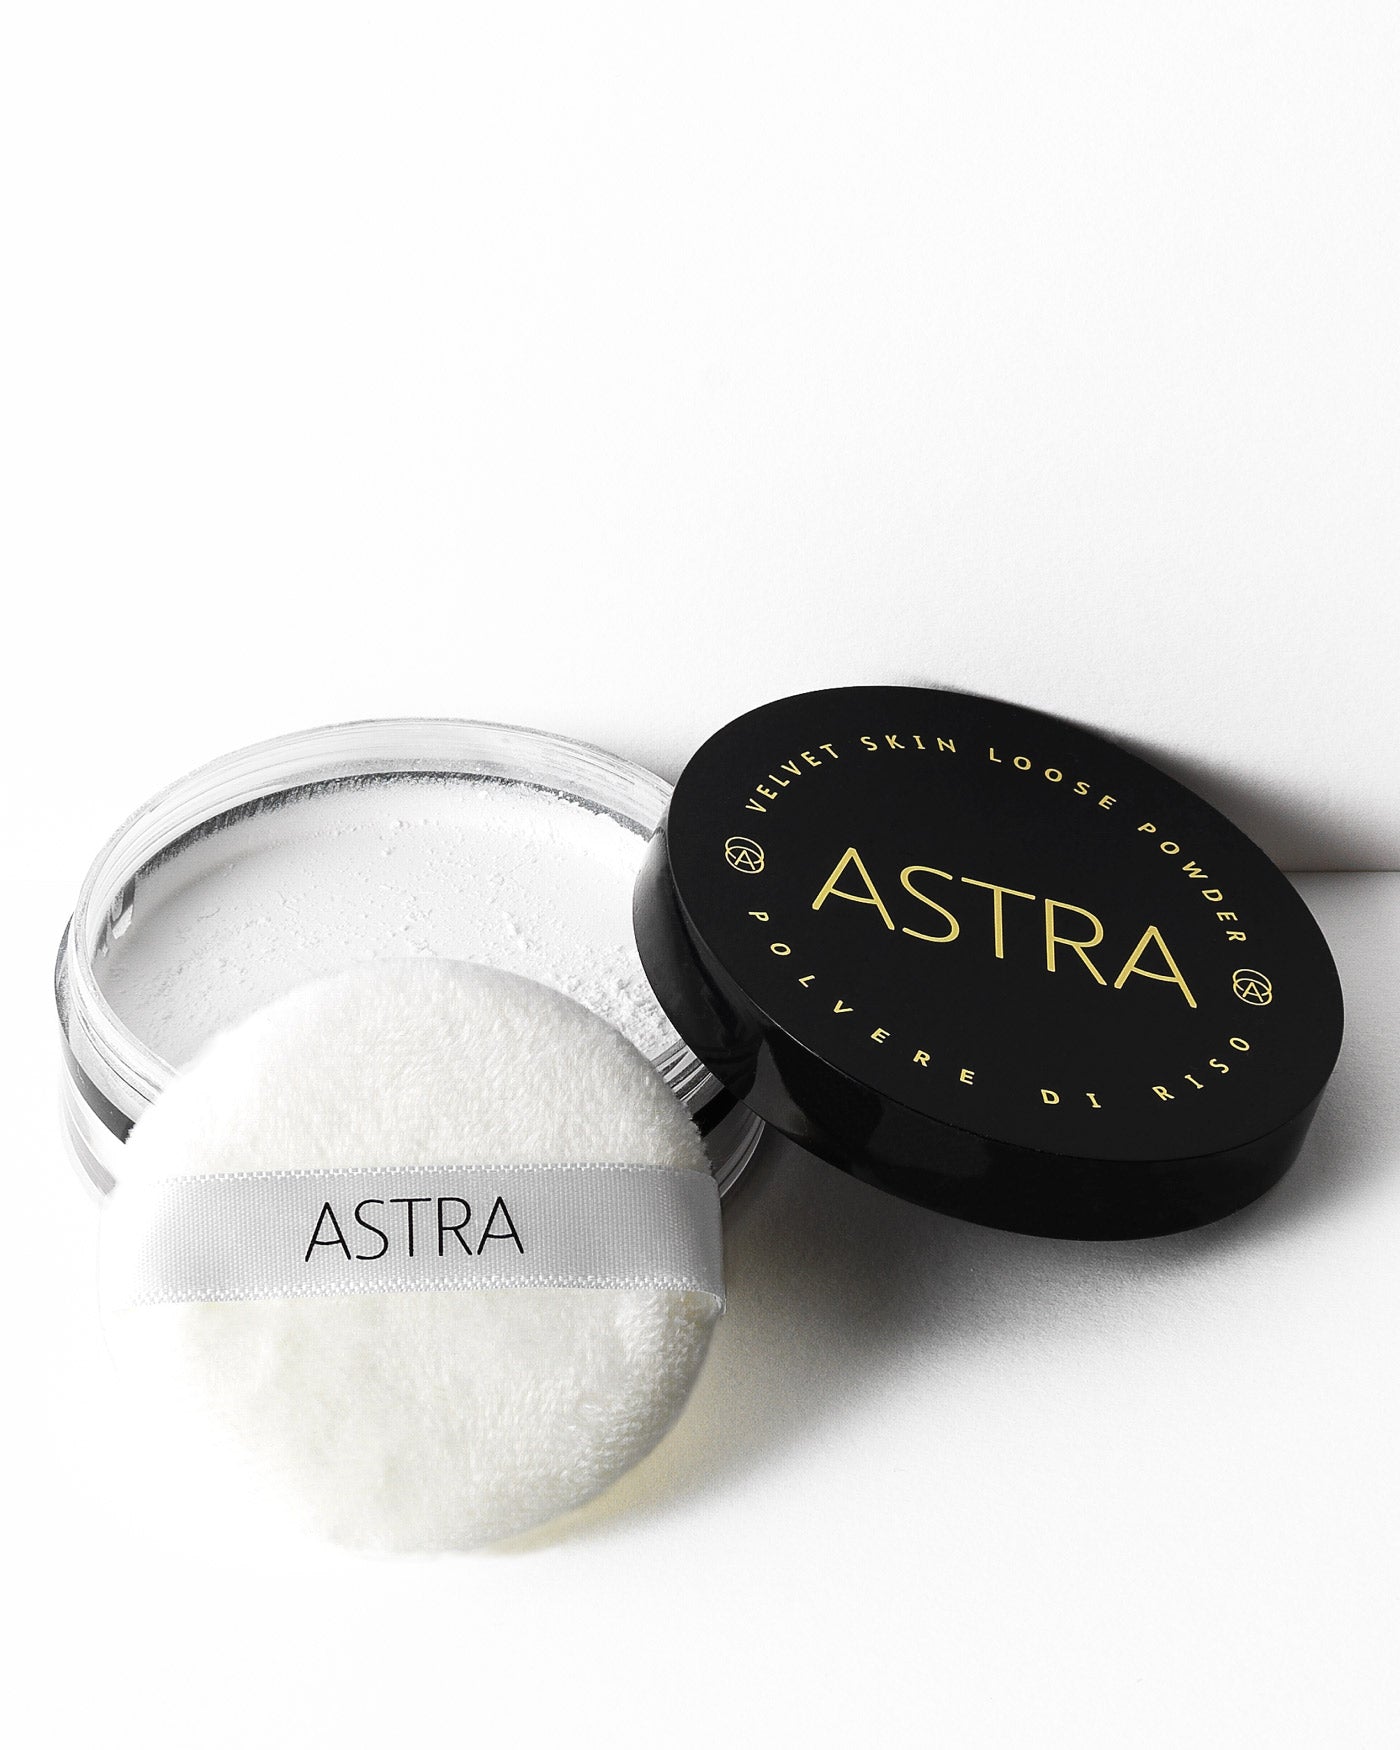 VELVET SKIN LOOSE POWDER RICE - All Products - Astra Make-Up